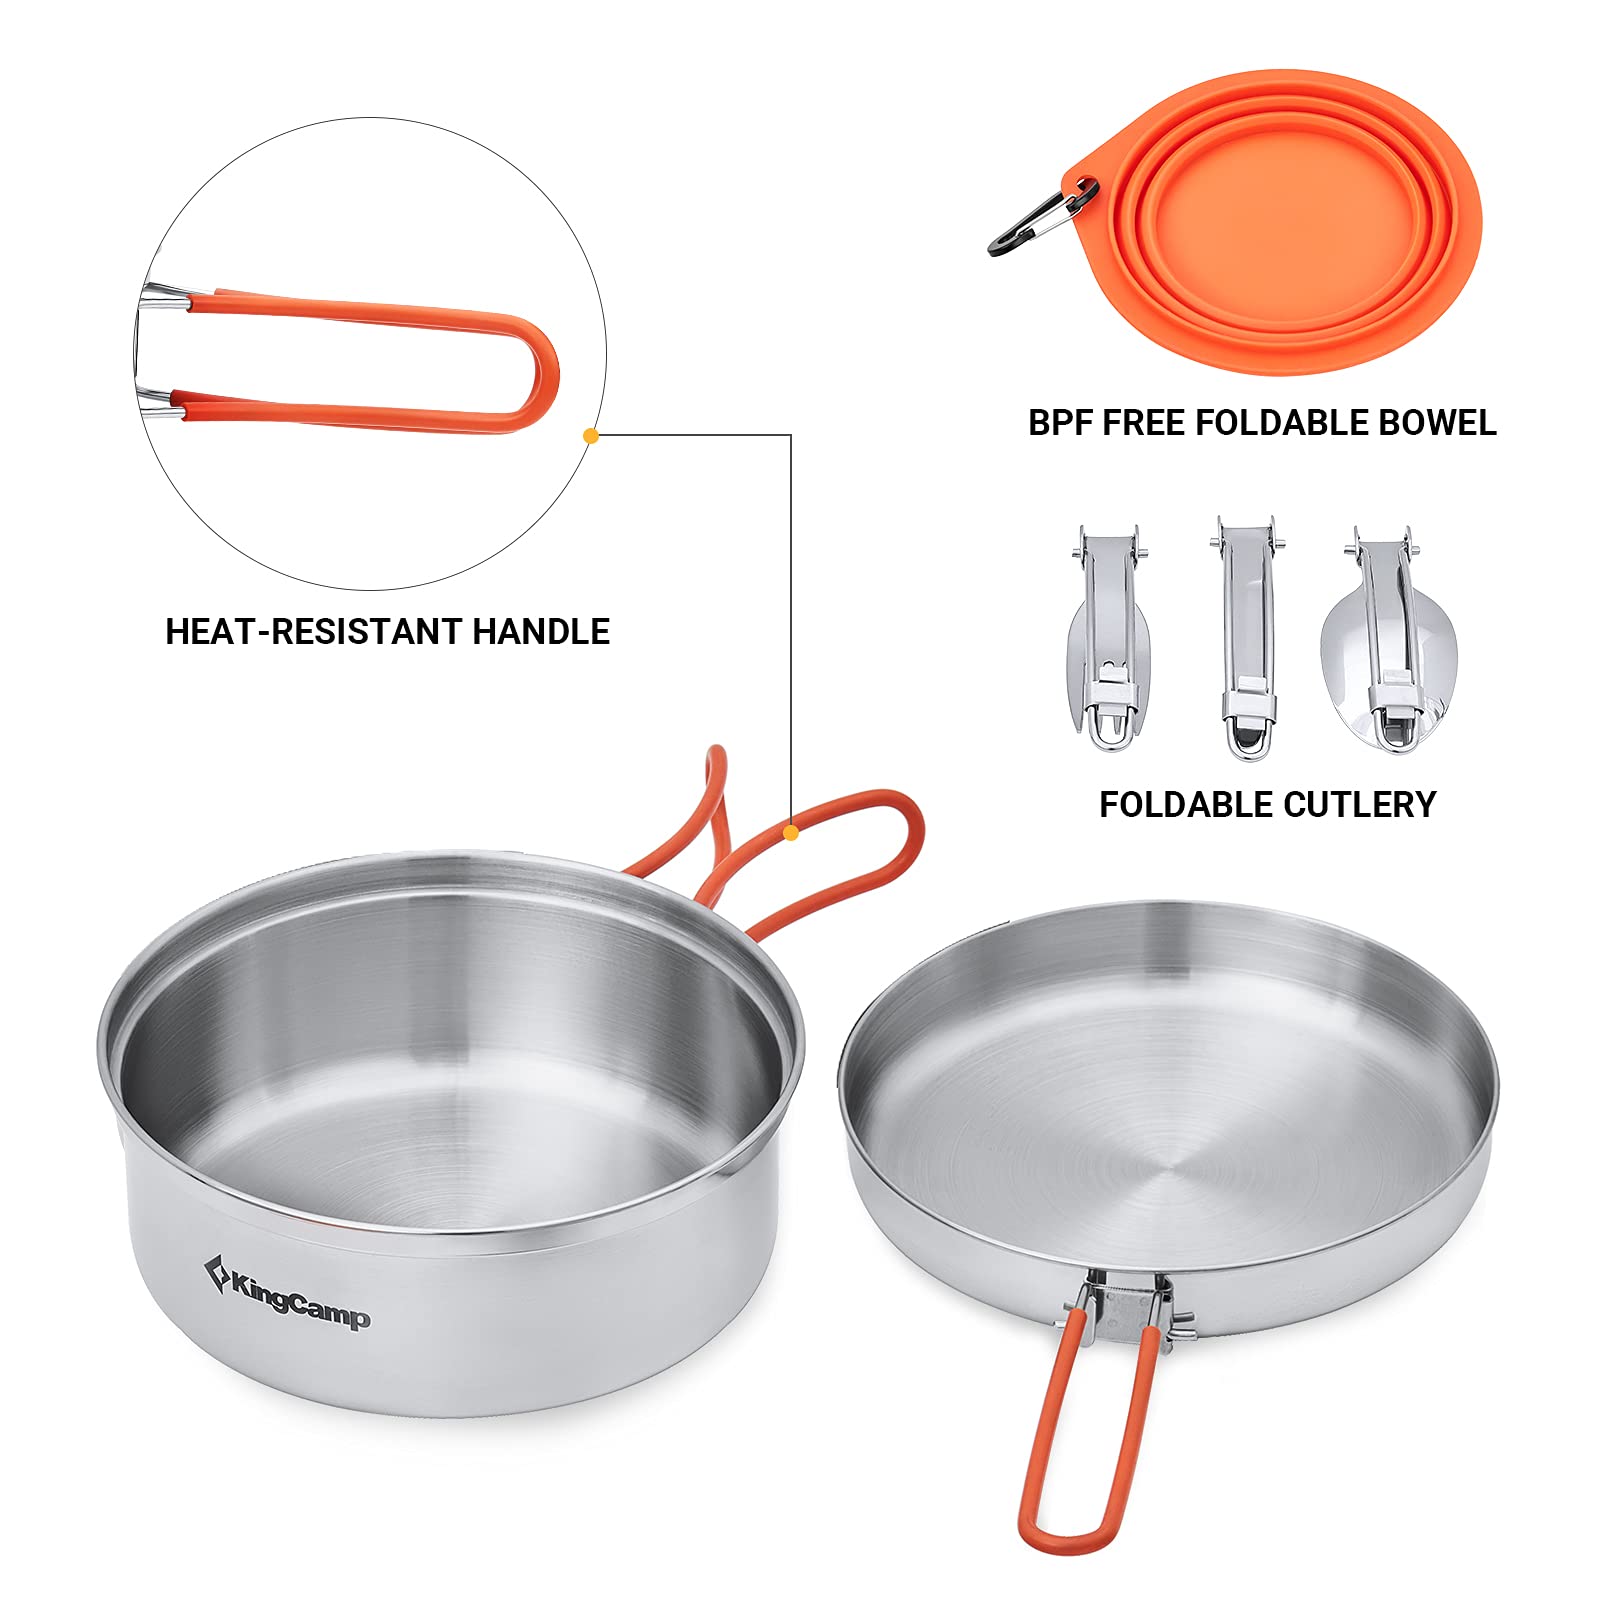 KingCamp 1-3 Person Cookware Mess Kit